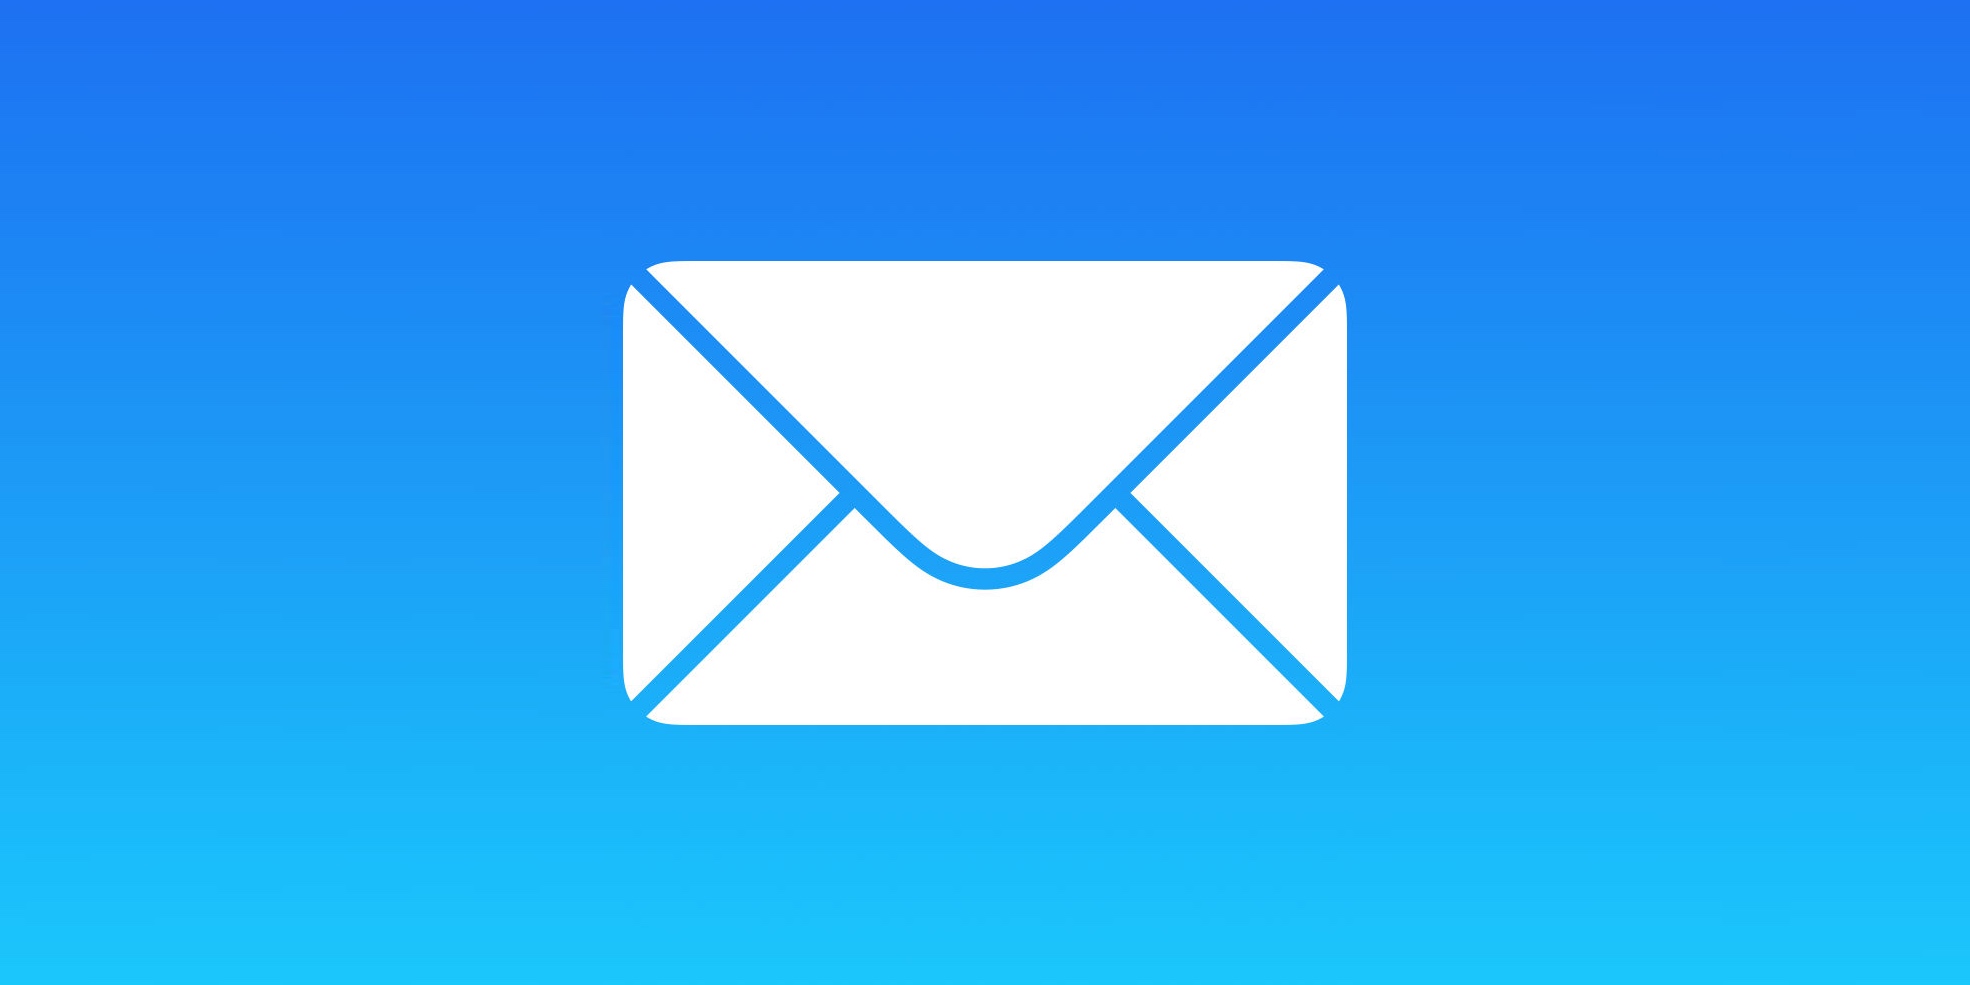 best email application for mac